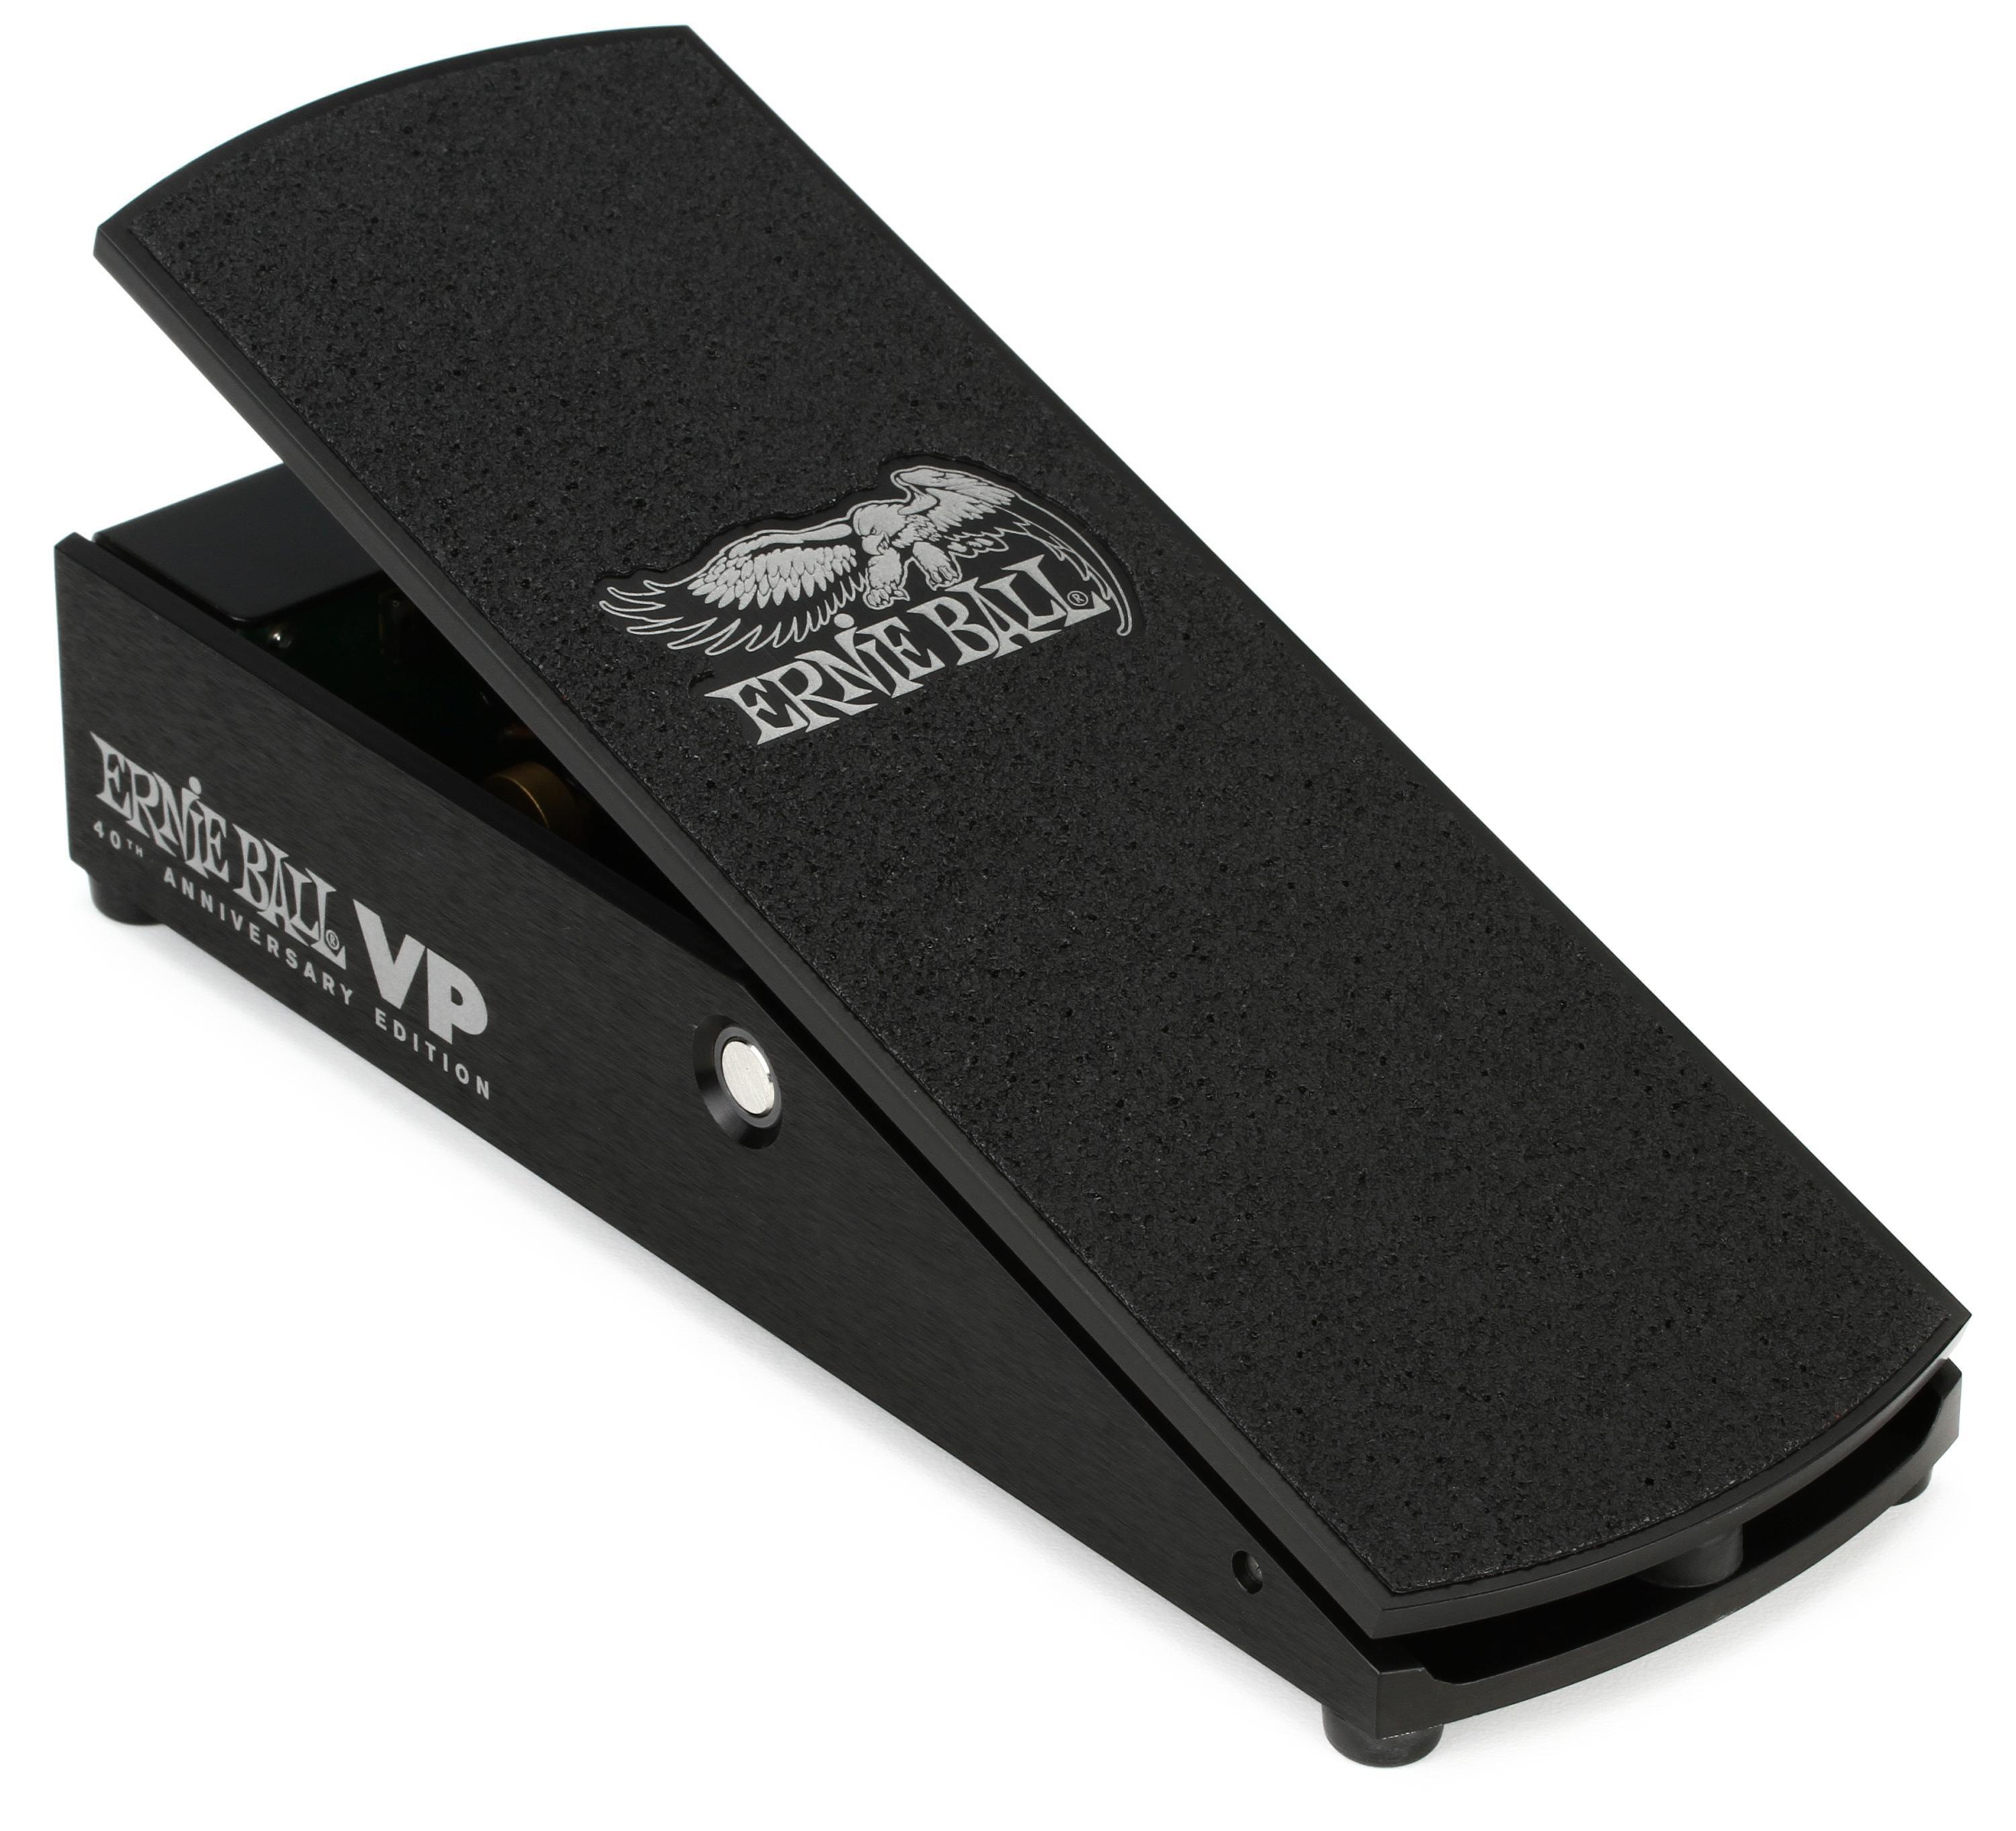 Ernie Ball 40th Anniversary Volume Pedal | Sweetwater